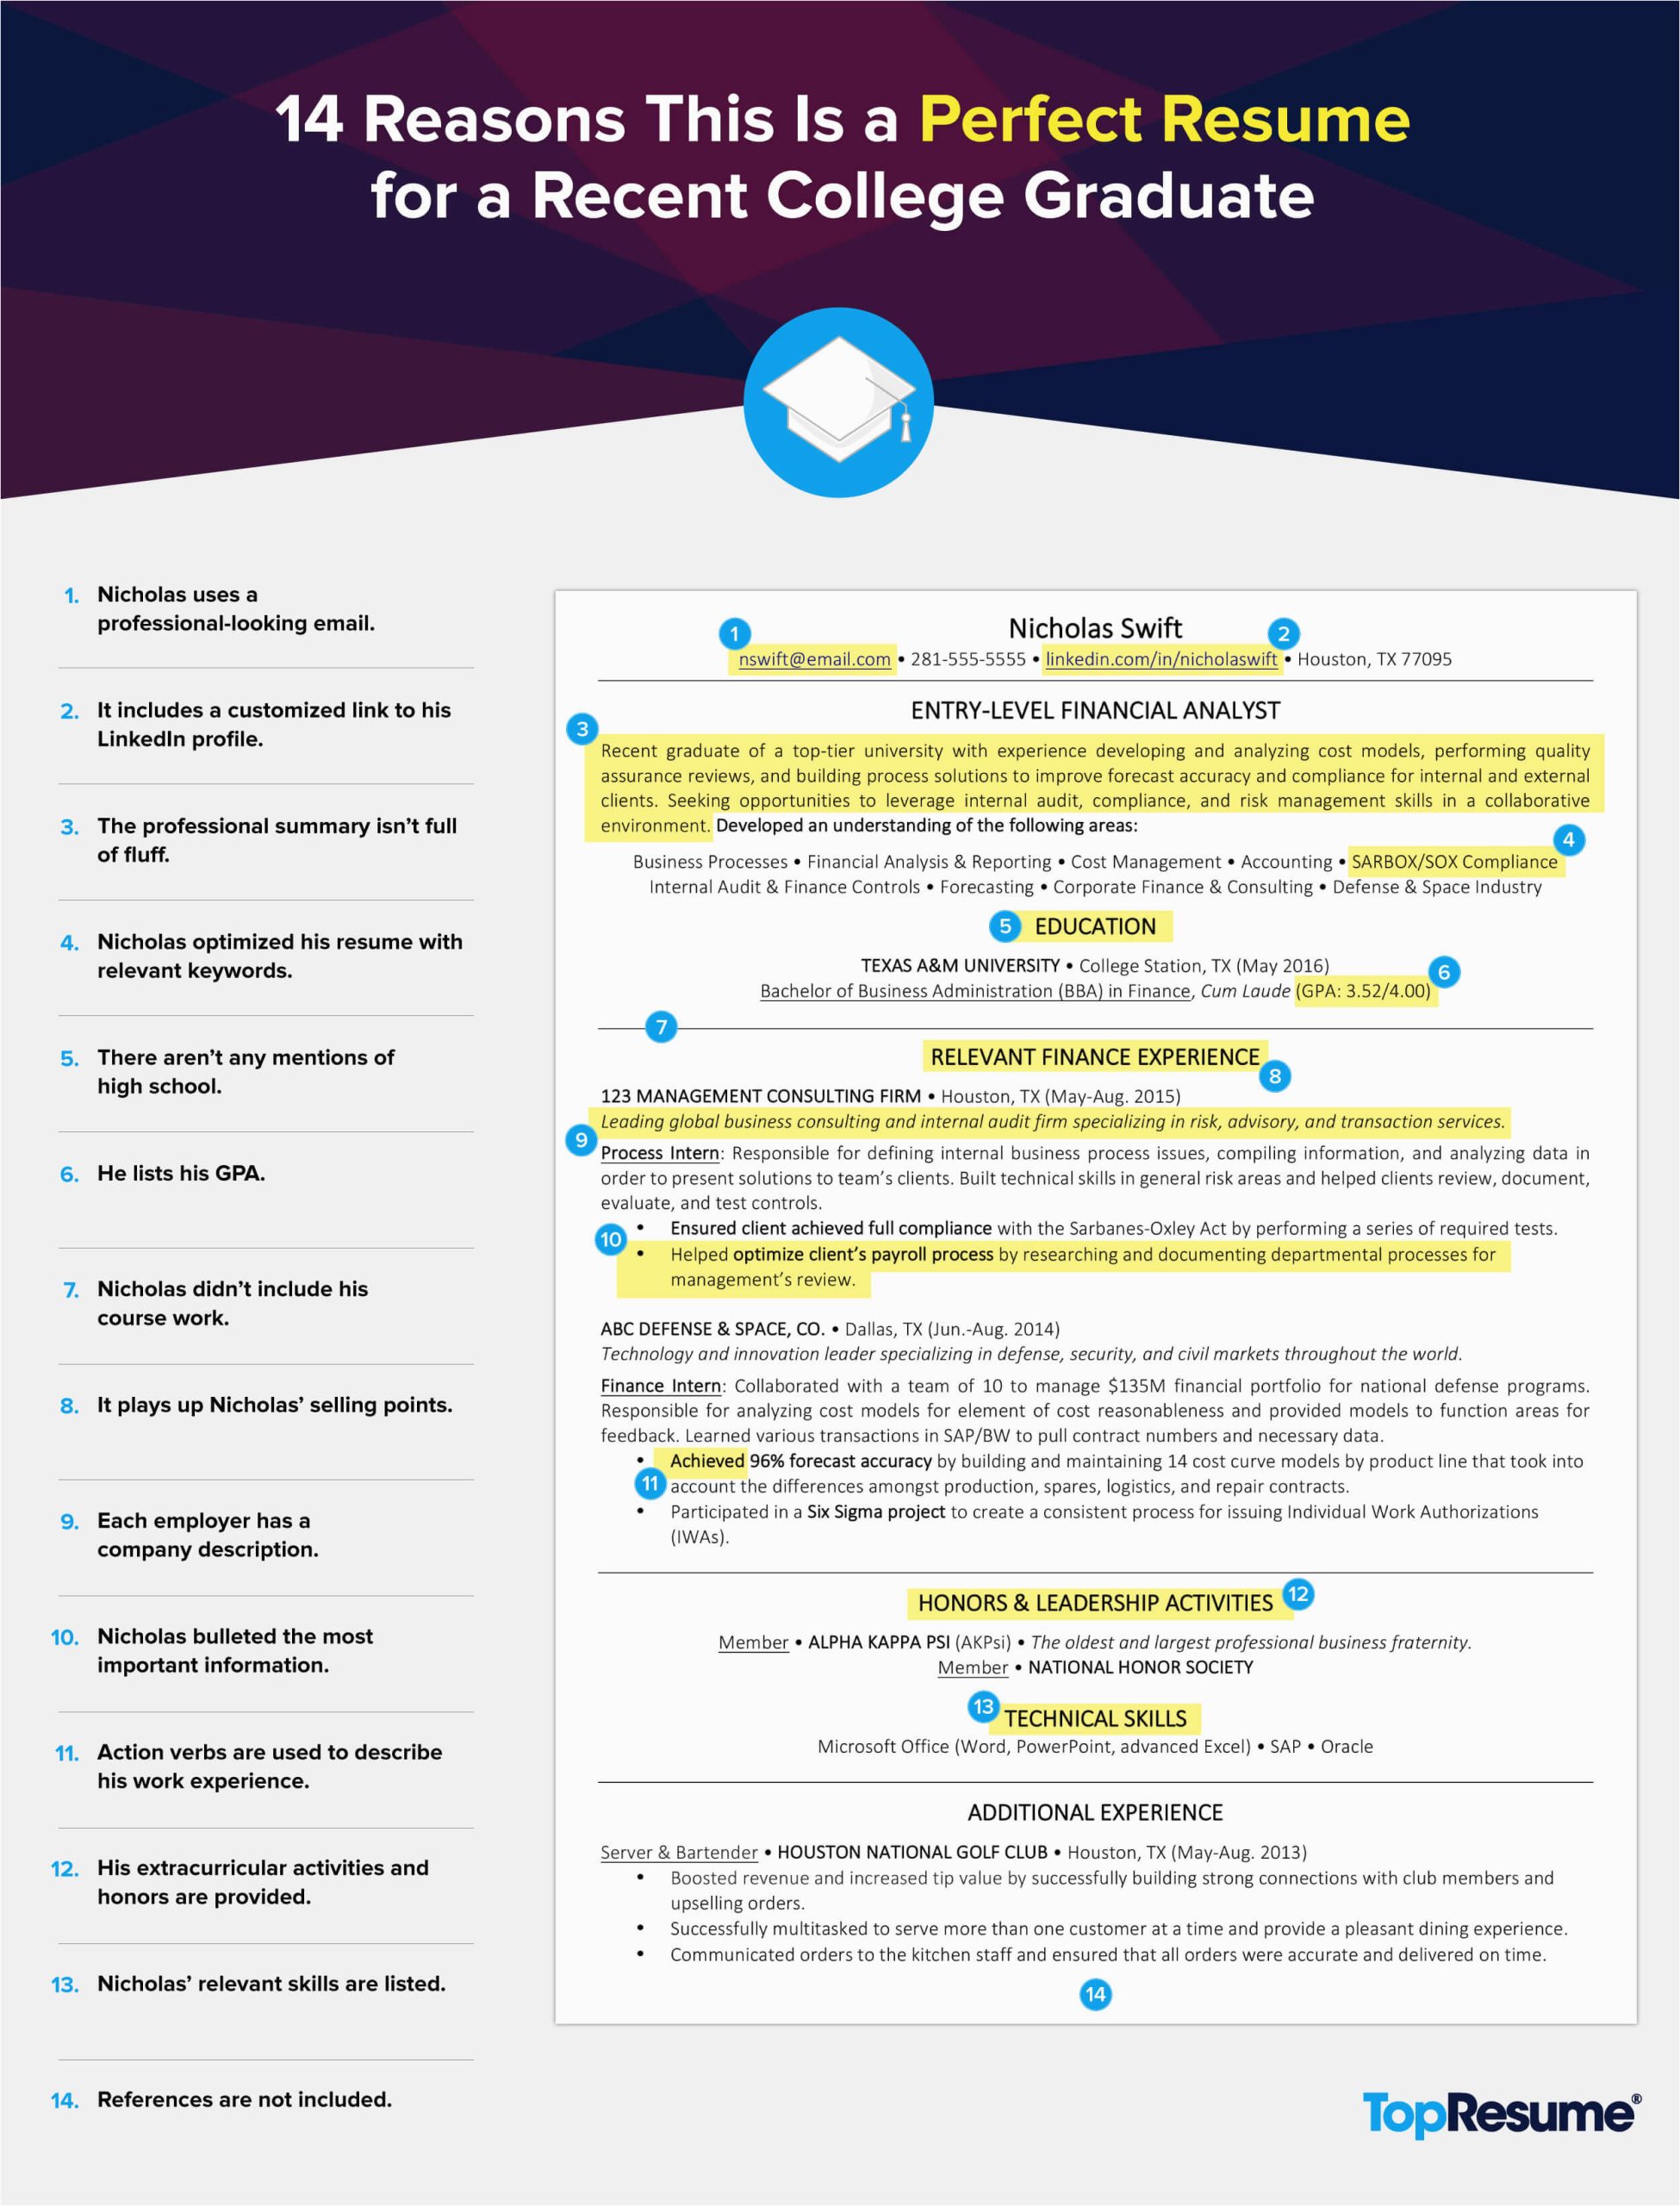 Sample Profile for Resume for New Graduate 14 Reasons This is A Perfect Recent College Graduate Resume